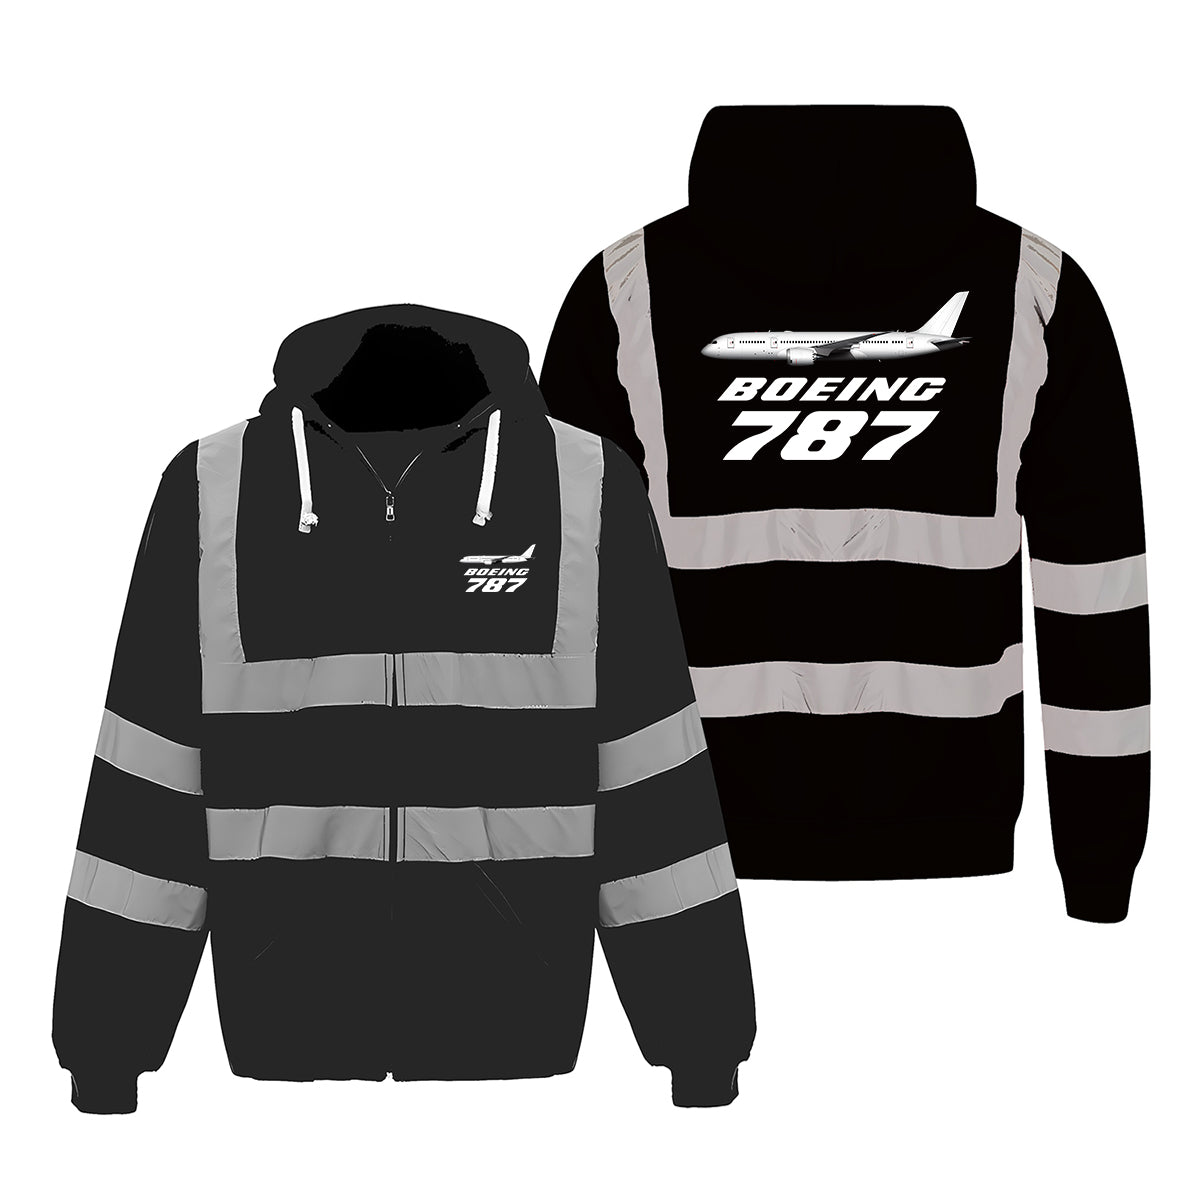 The Boeing 787 Designed Reflective Zipped Hoodies